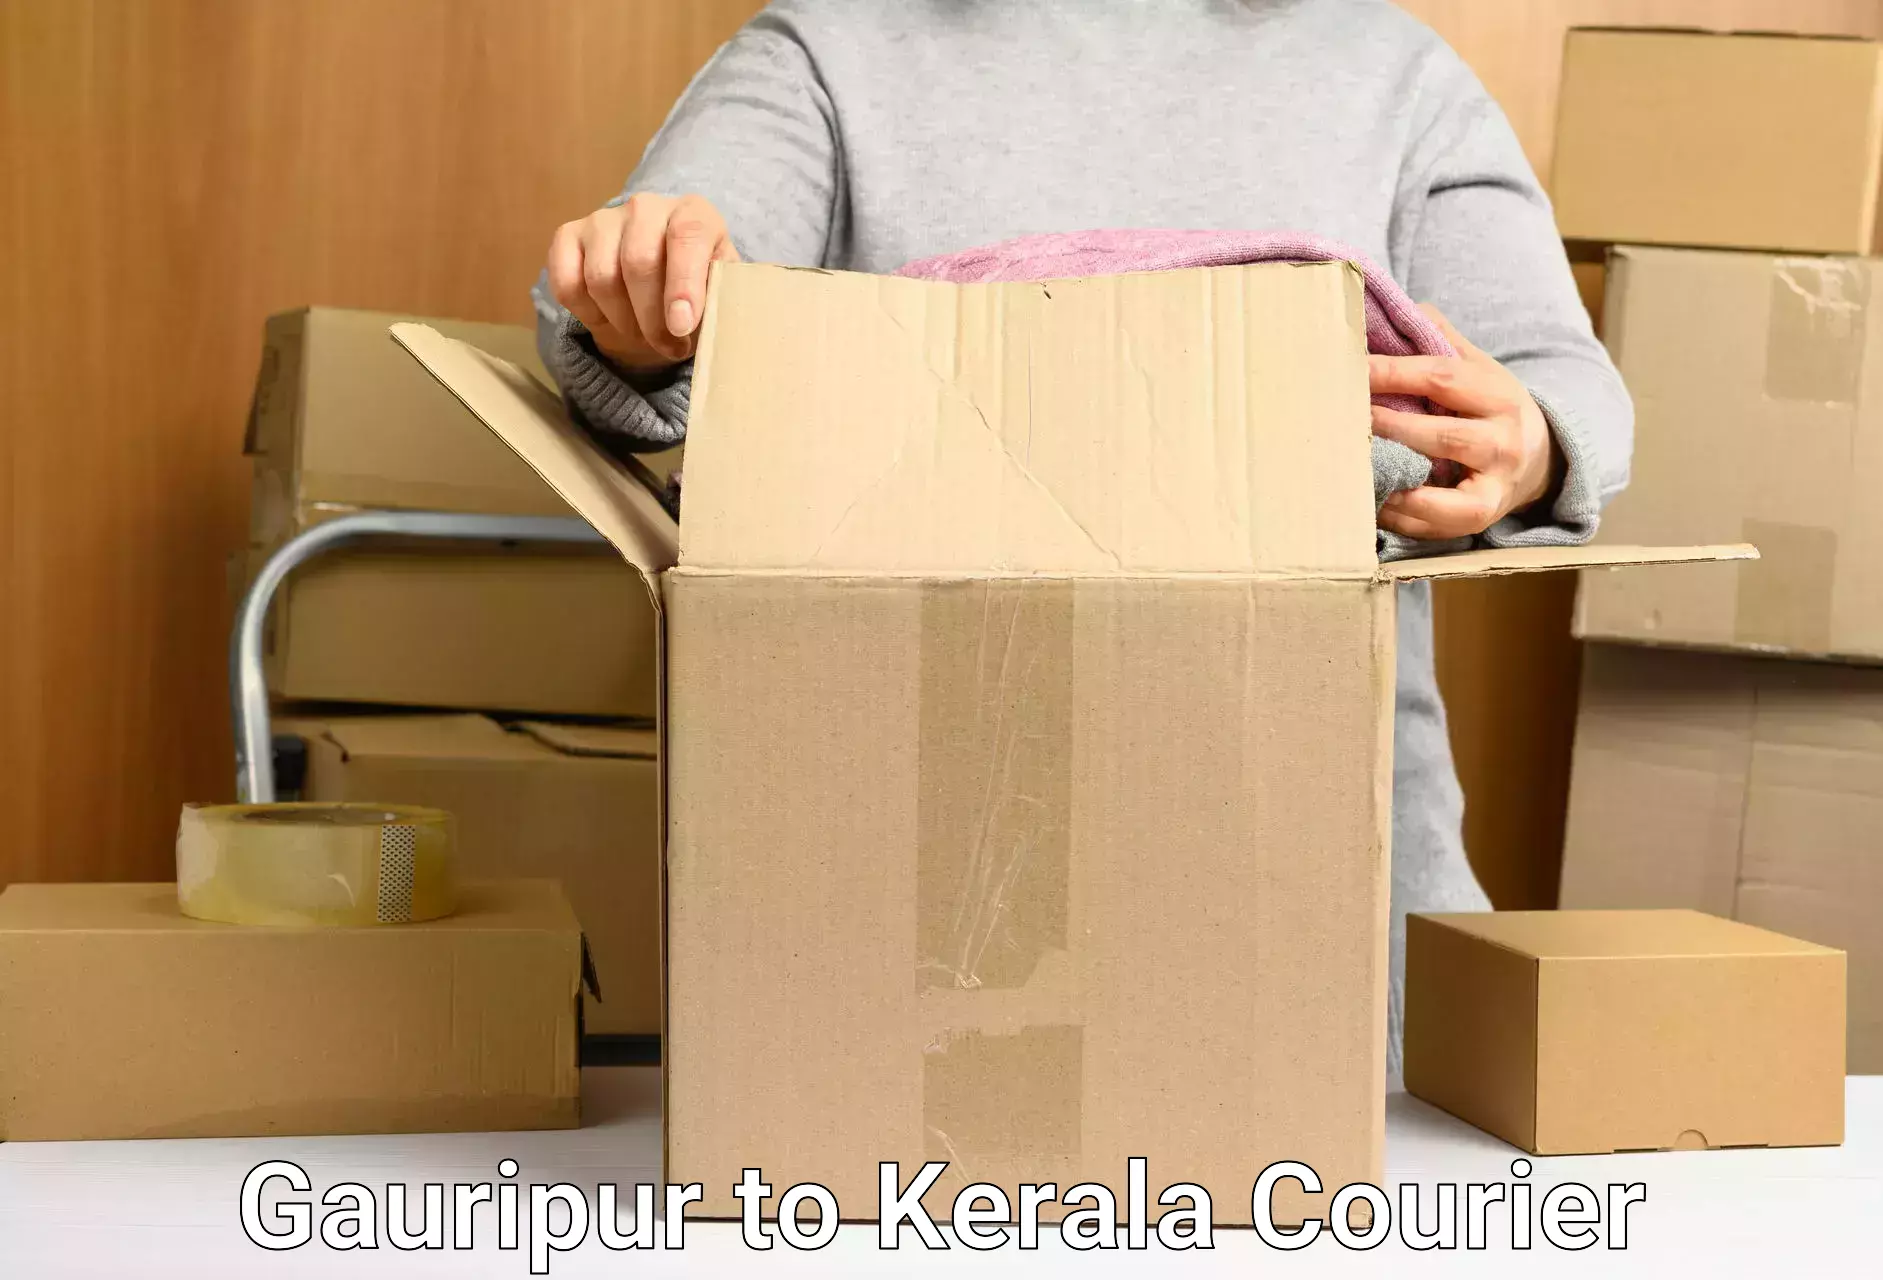 User-friendly delivery service Gauripur to Kadanad